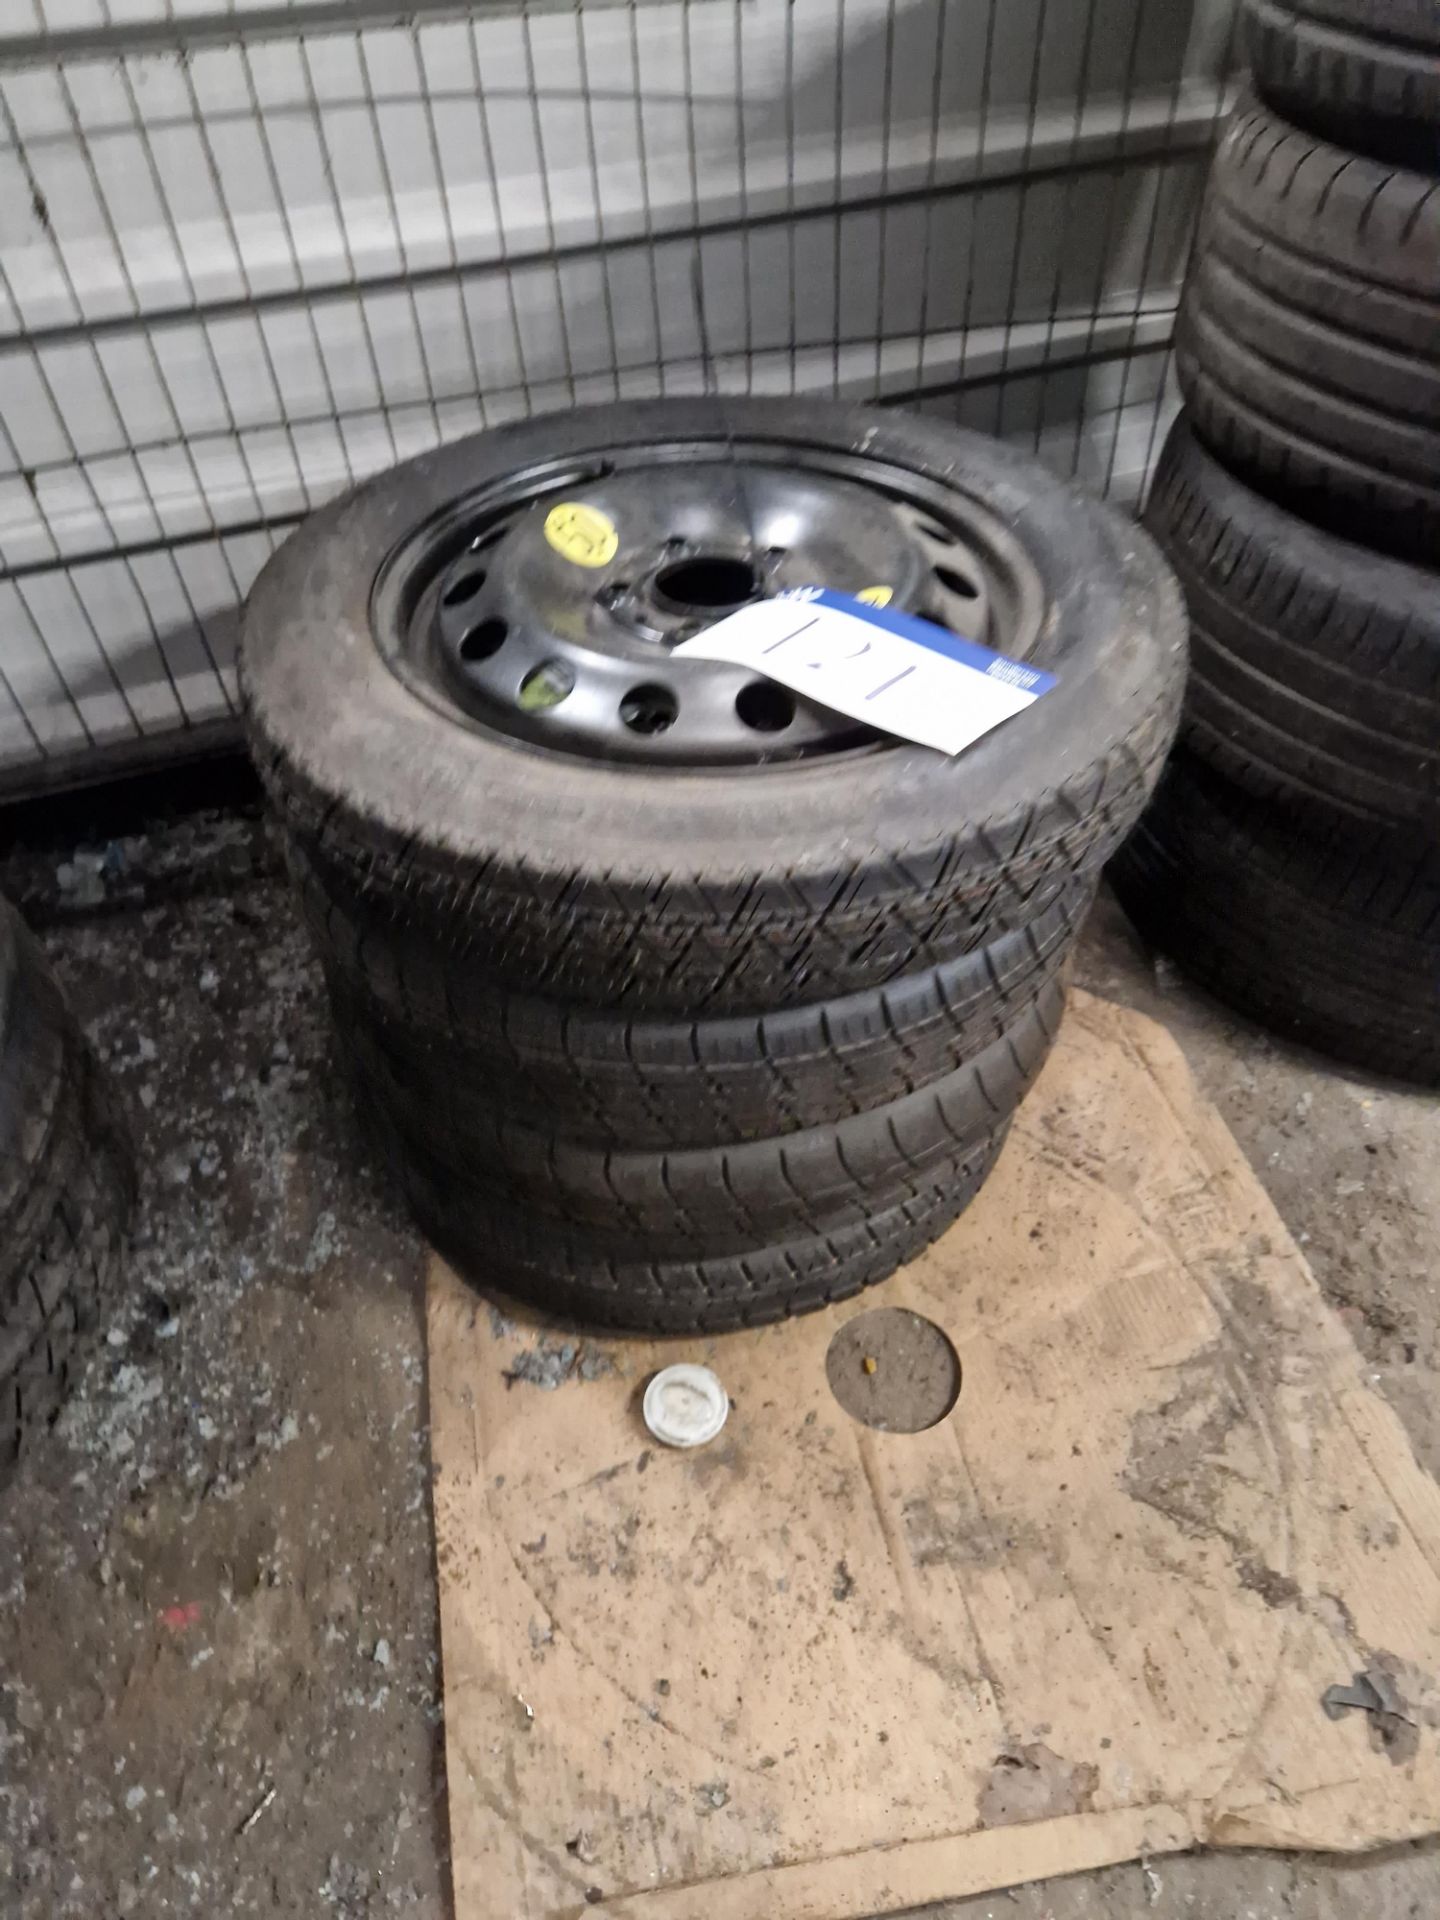 Four 16" Space Saver Spare Wheels Please read the following important notes:- ***Overseas buyers -